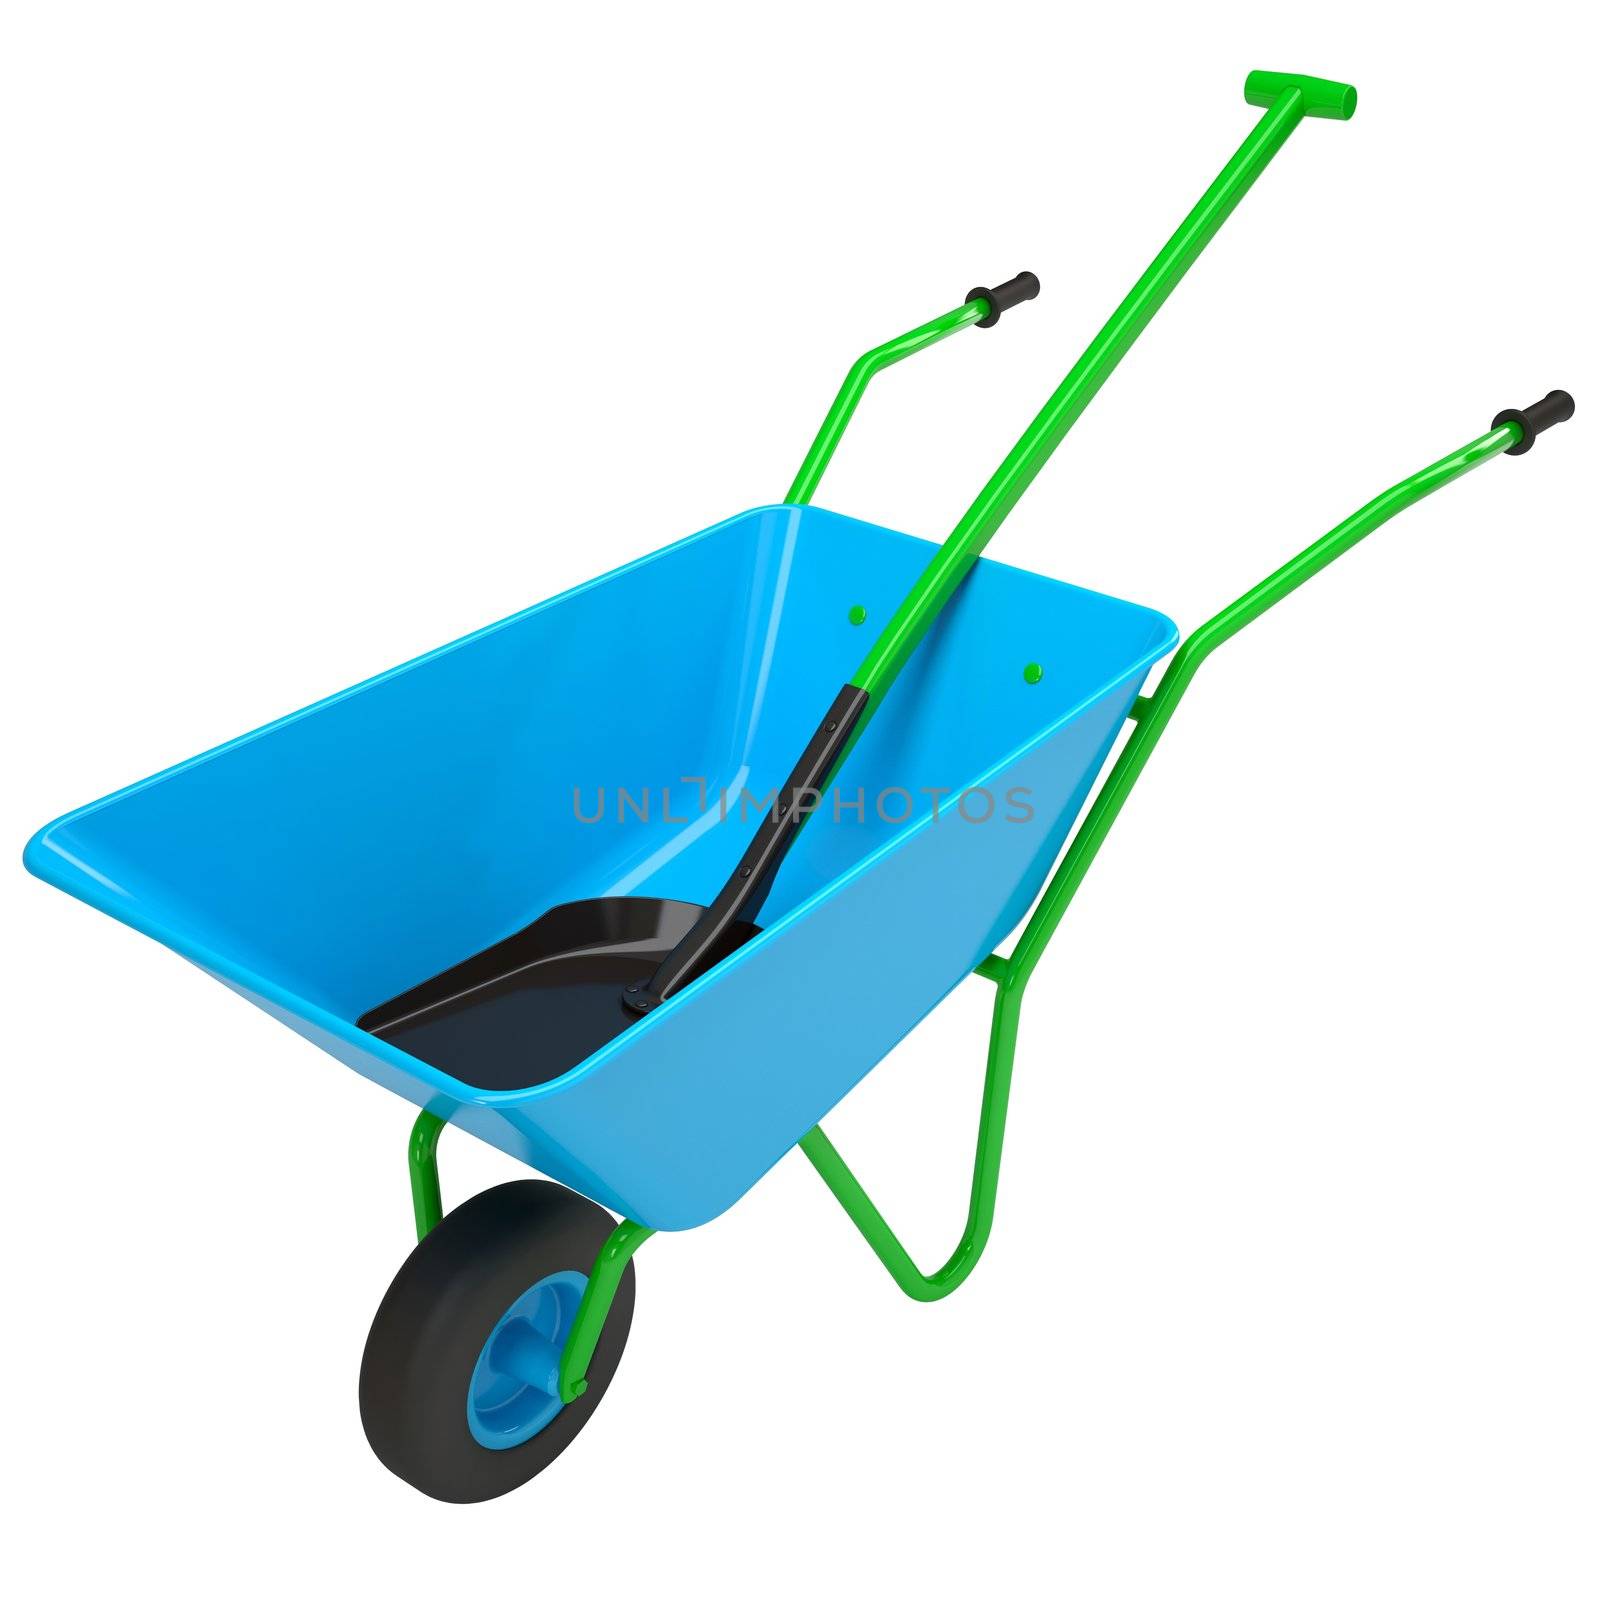 Wheelbarrows and shovel. Isolated render on a white background